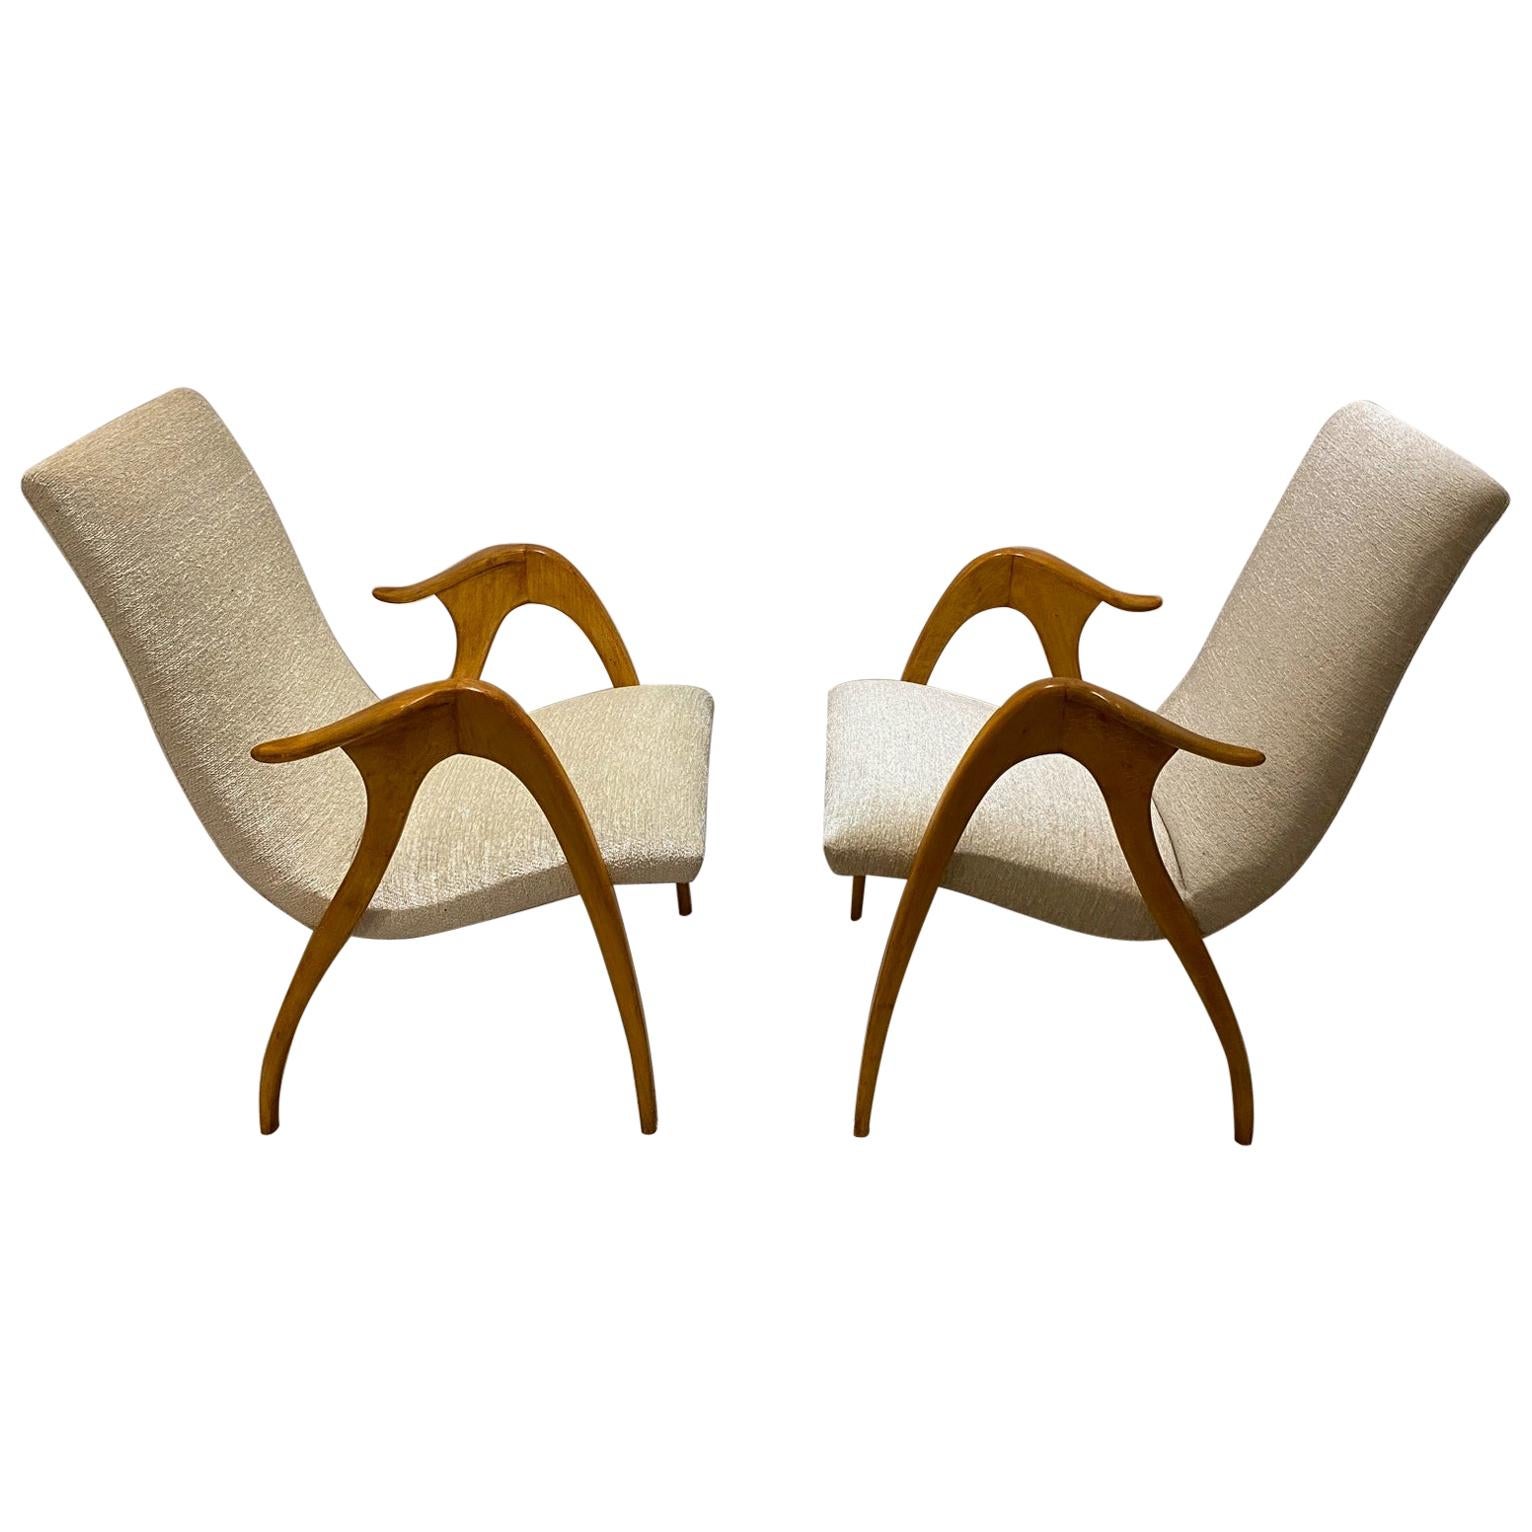 Italian Design Pair of Maple Wood Chairs by Malatesta and Masson, Italy, 1950s